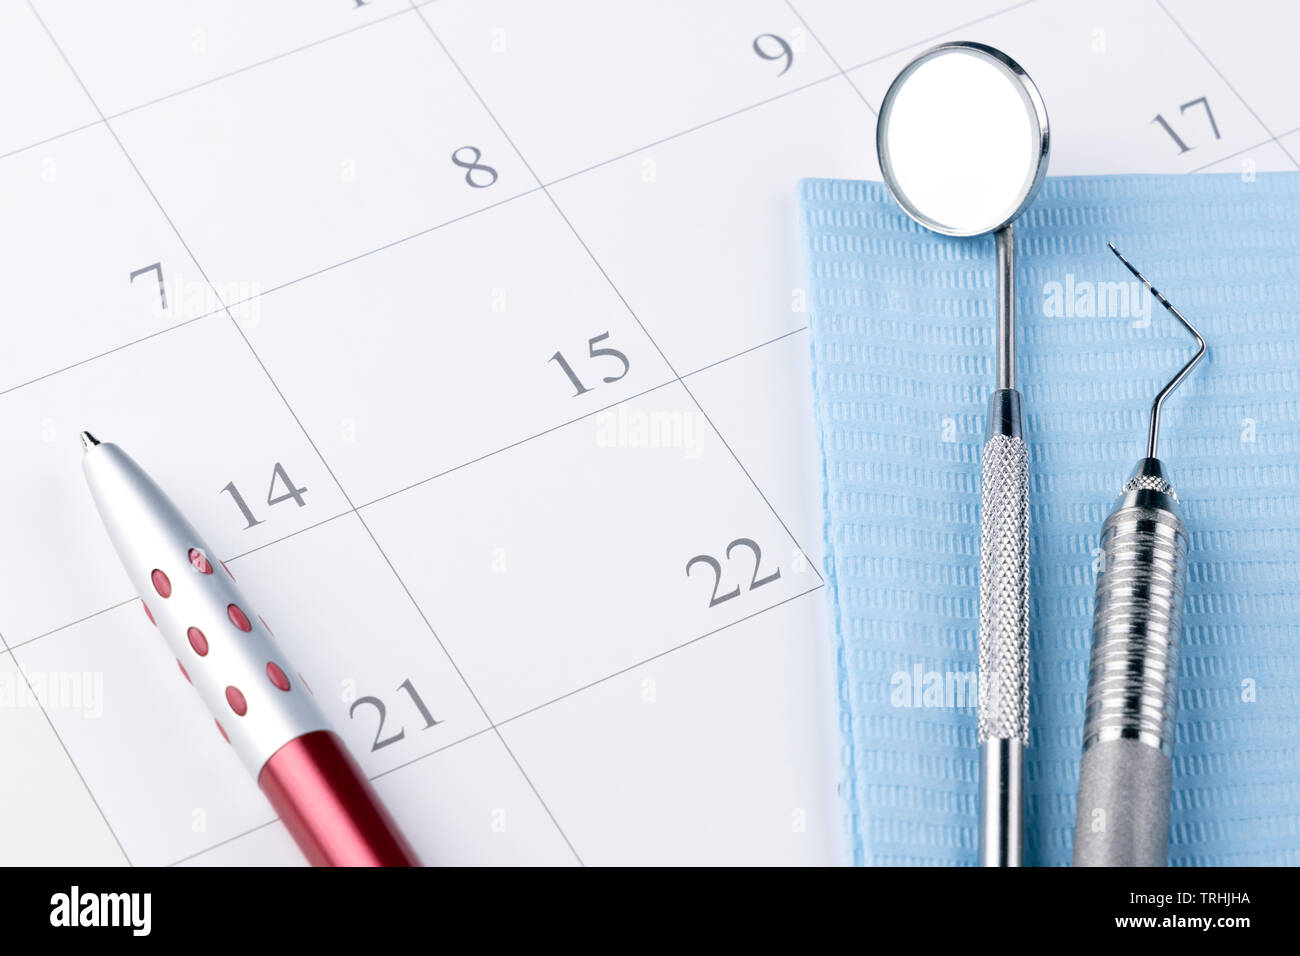 Dentist appointment in calendar pen and professional dental tools.- Image Stock Photo